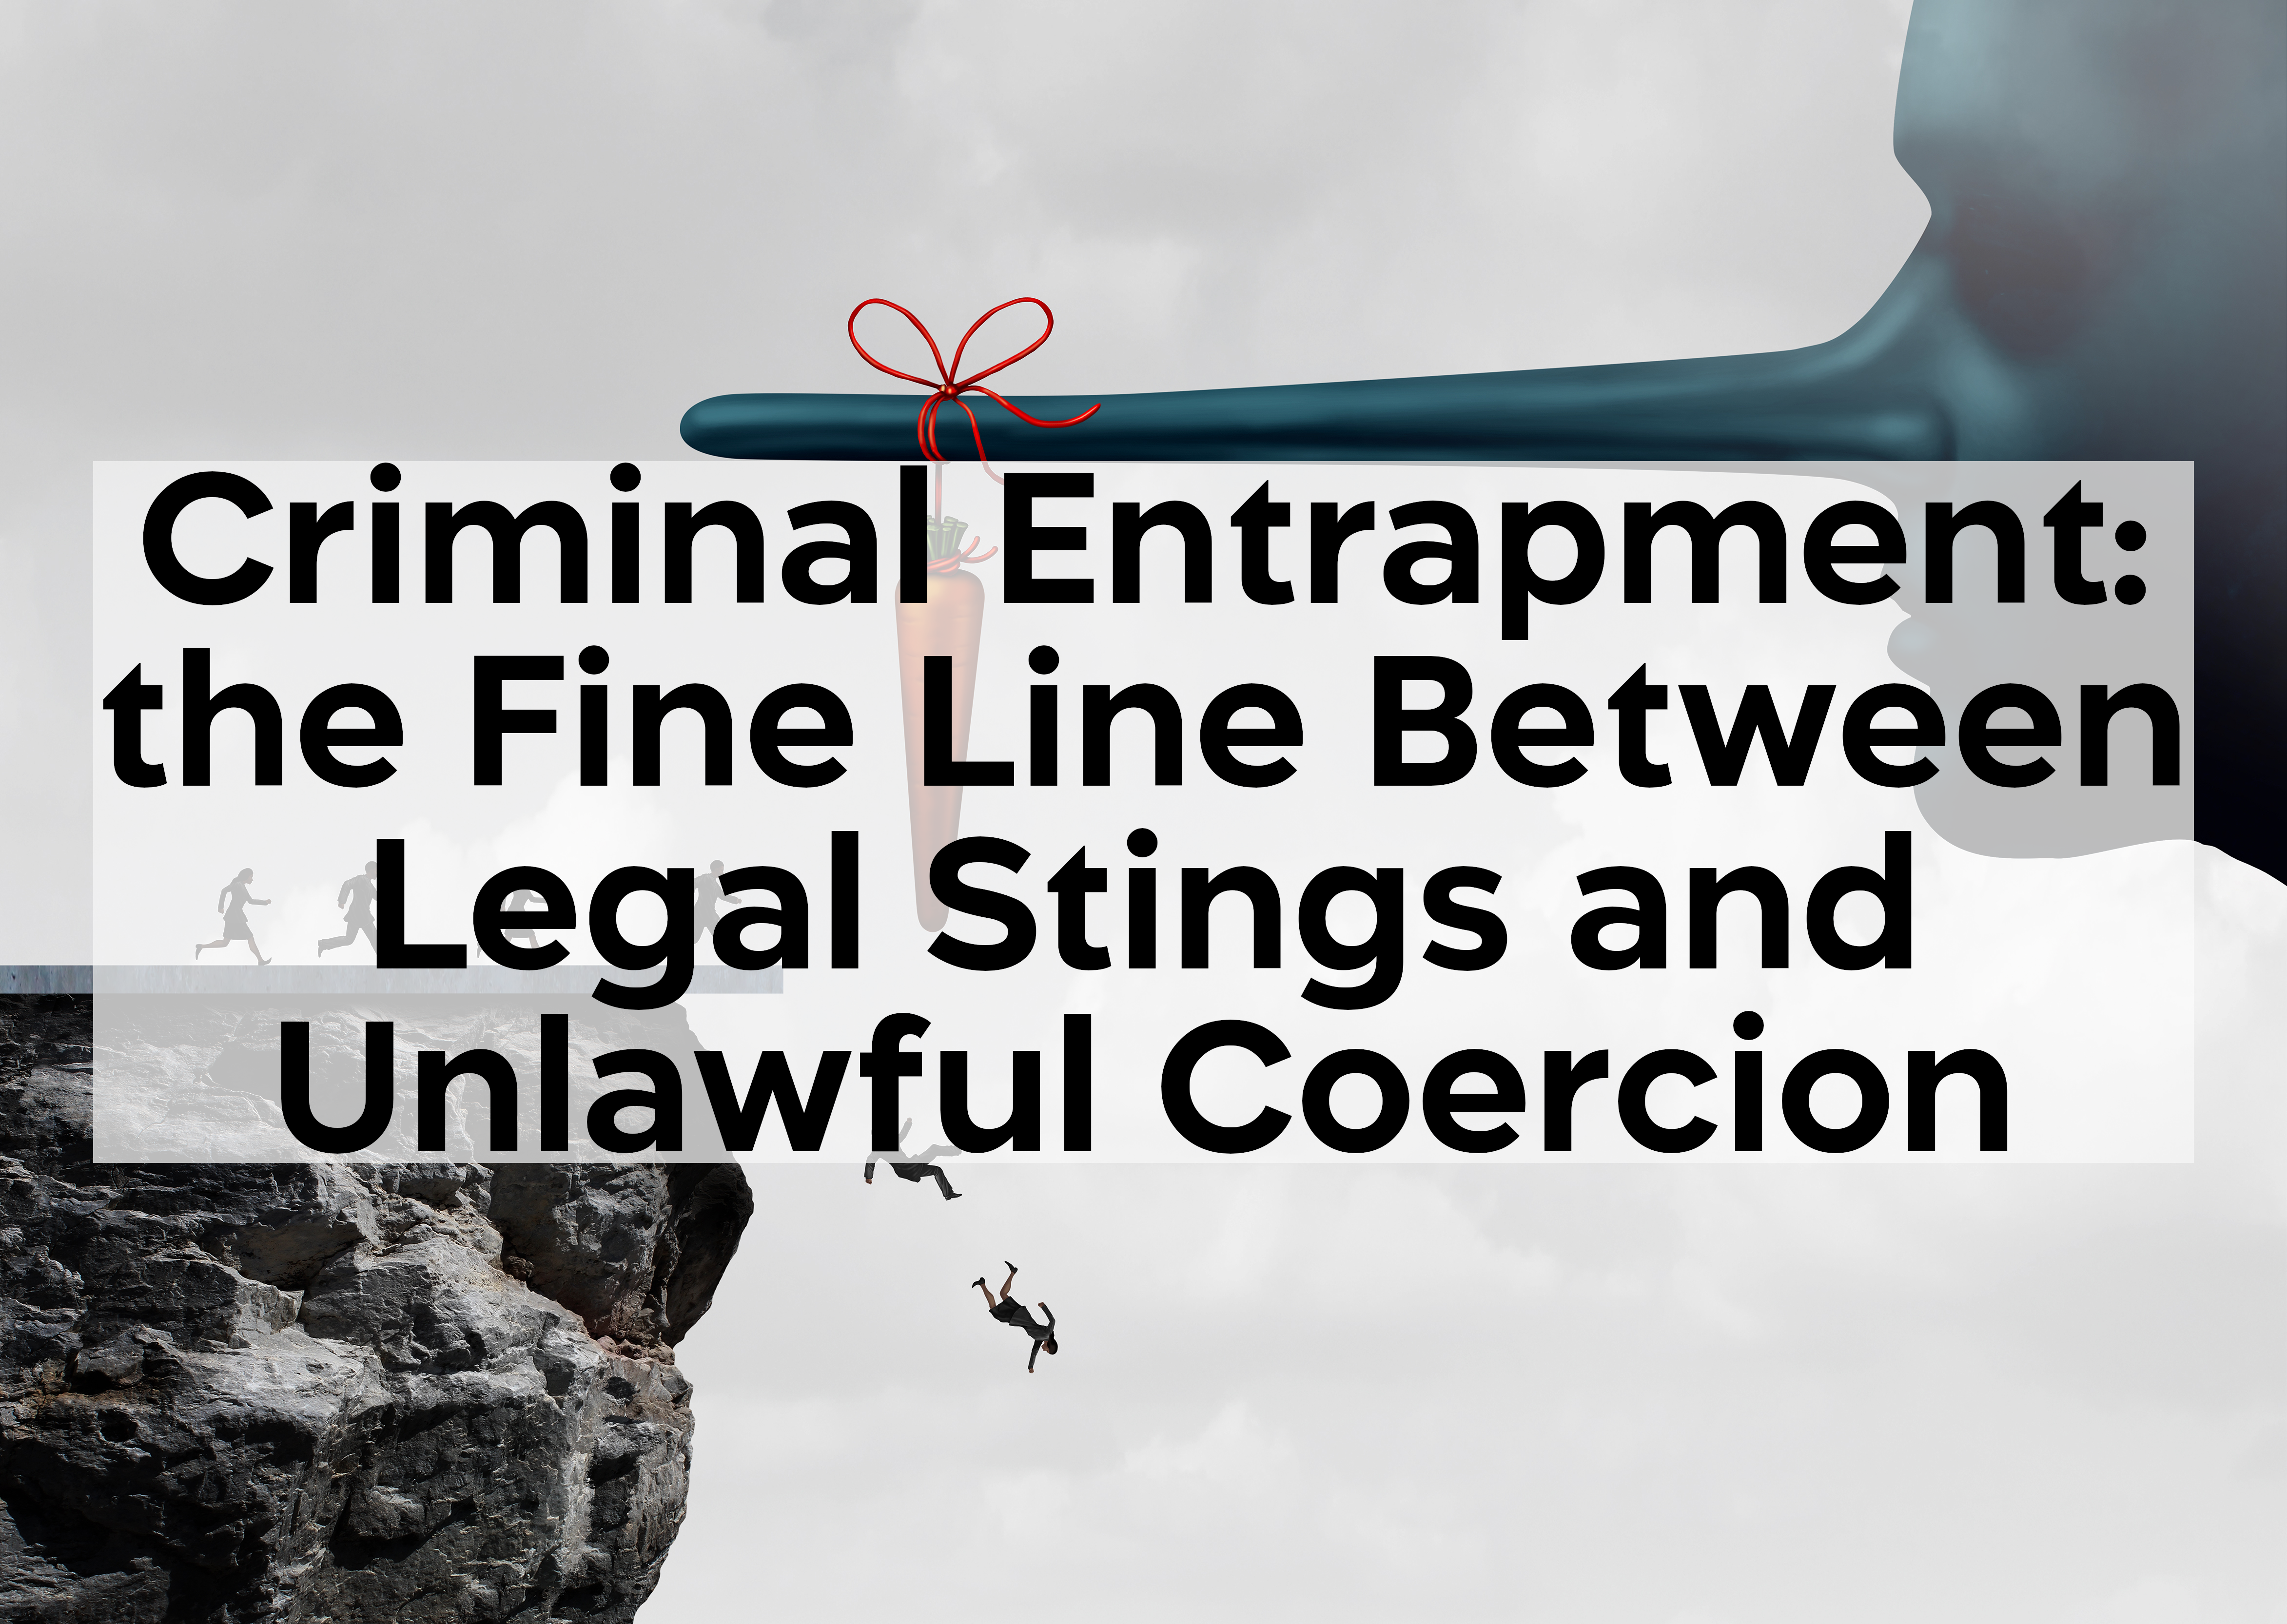 You are currently viewing Criminal Entrapment: the Fine Line Between Legal Stings and Unlawful Coercion